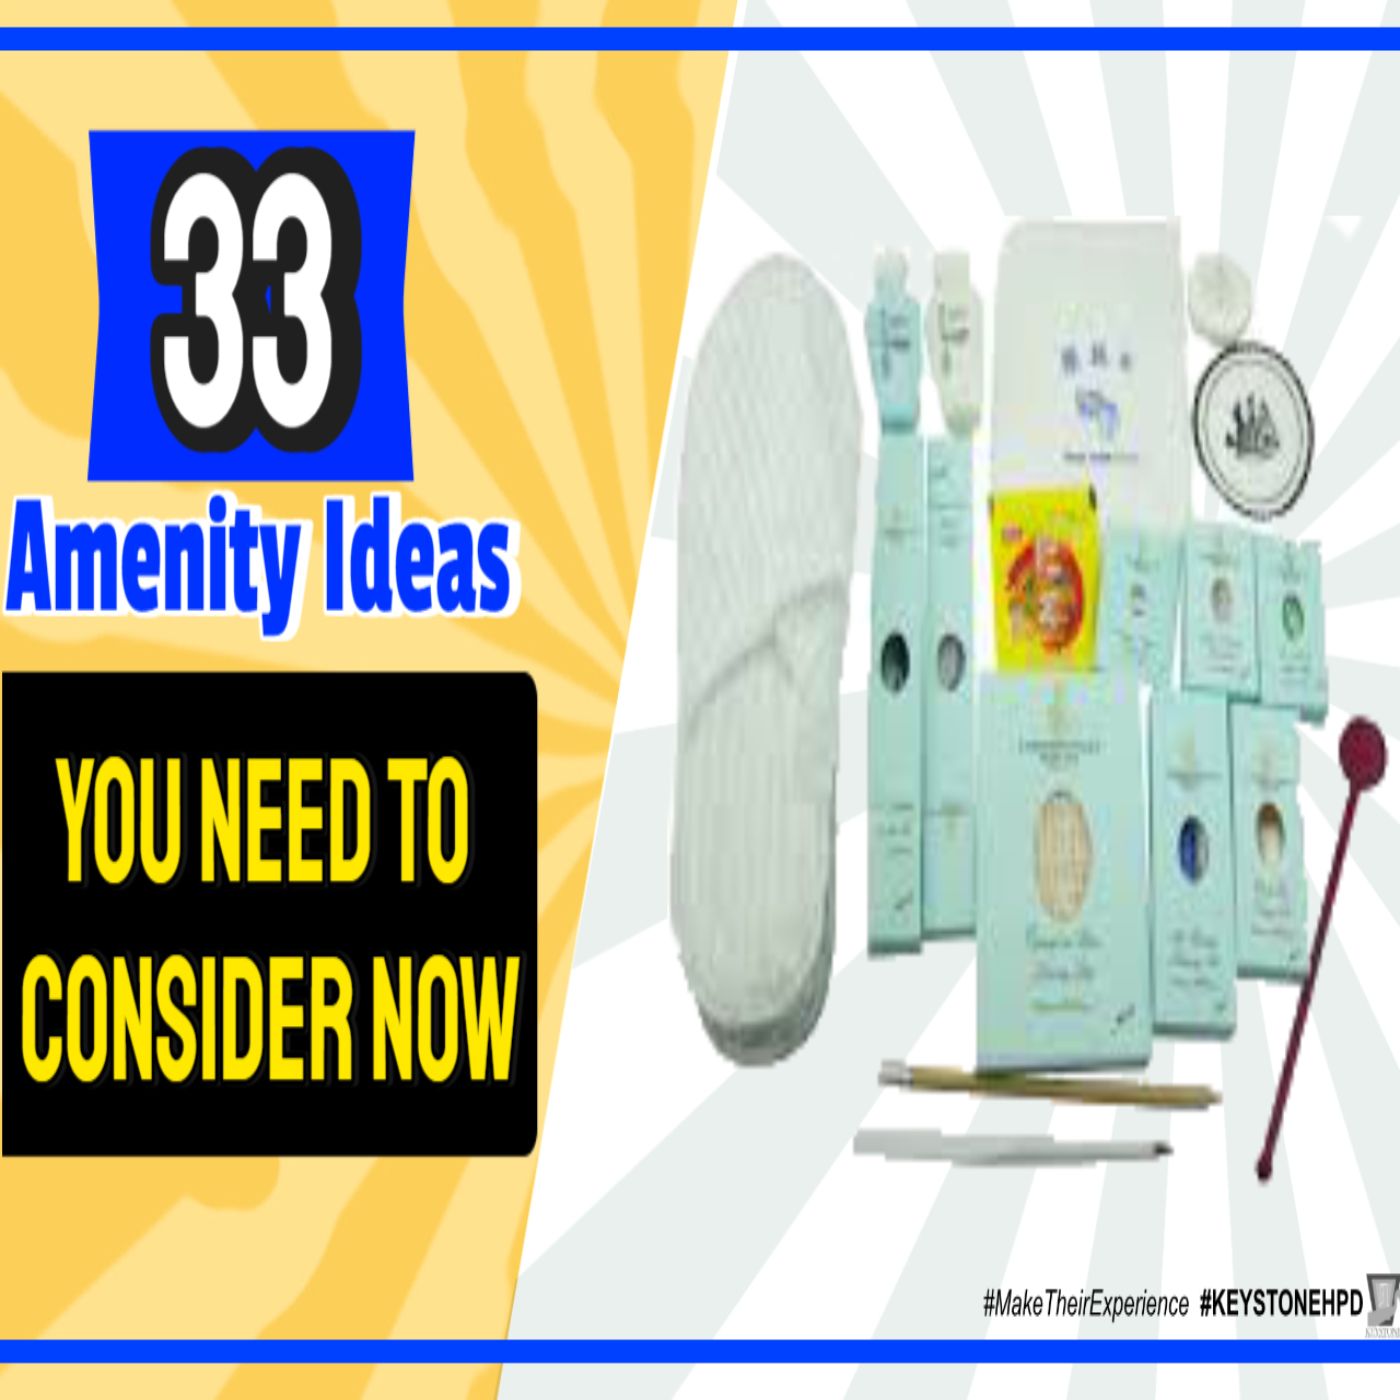 33 Amenity Ideas You Need To Consider Now | Ep. #280